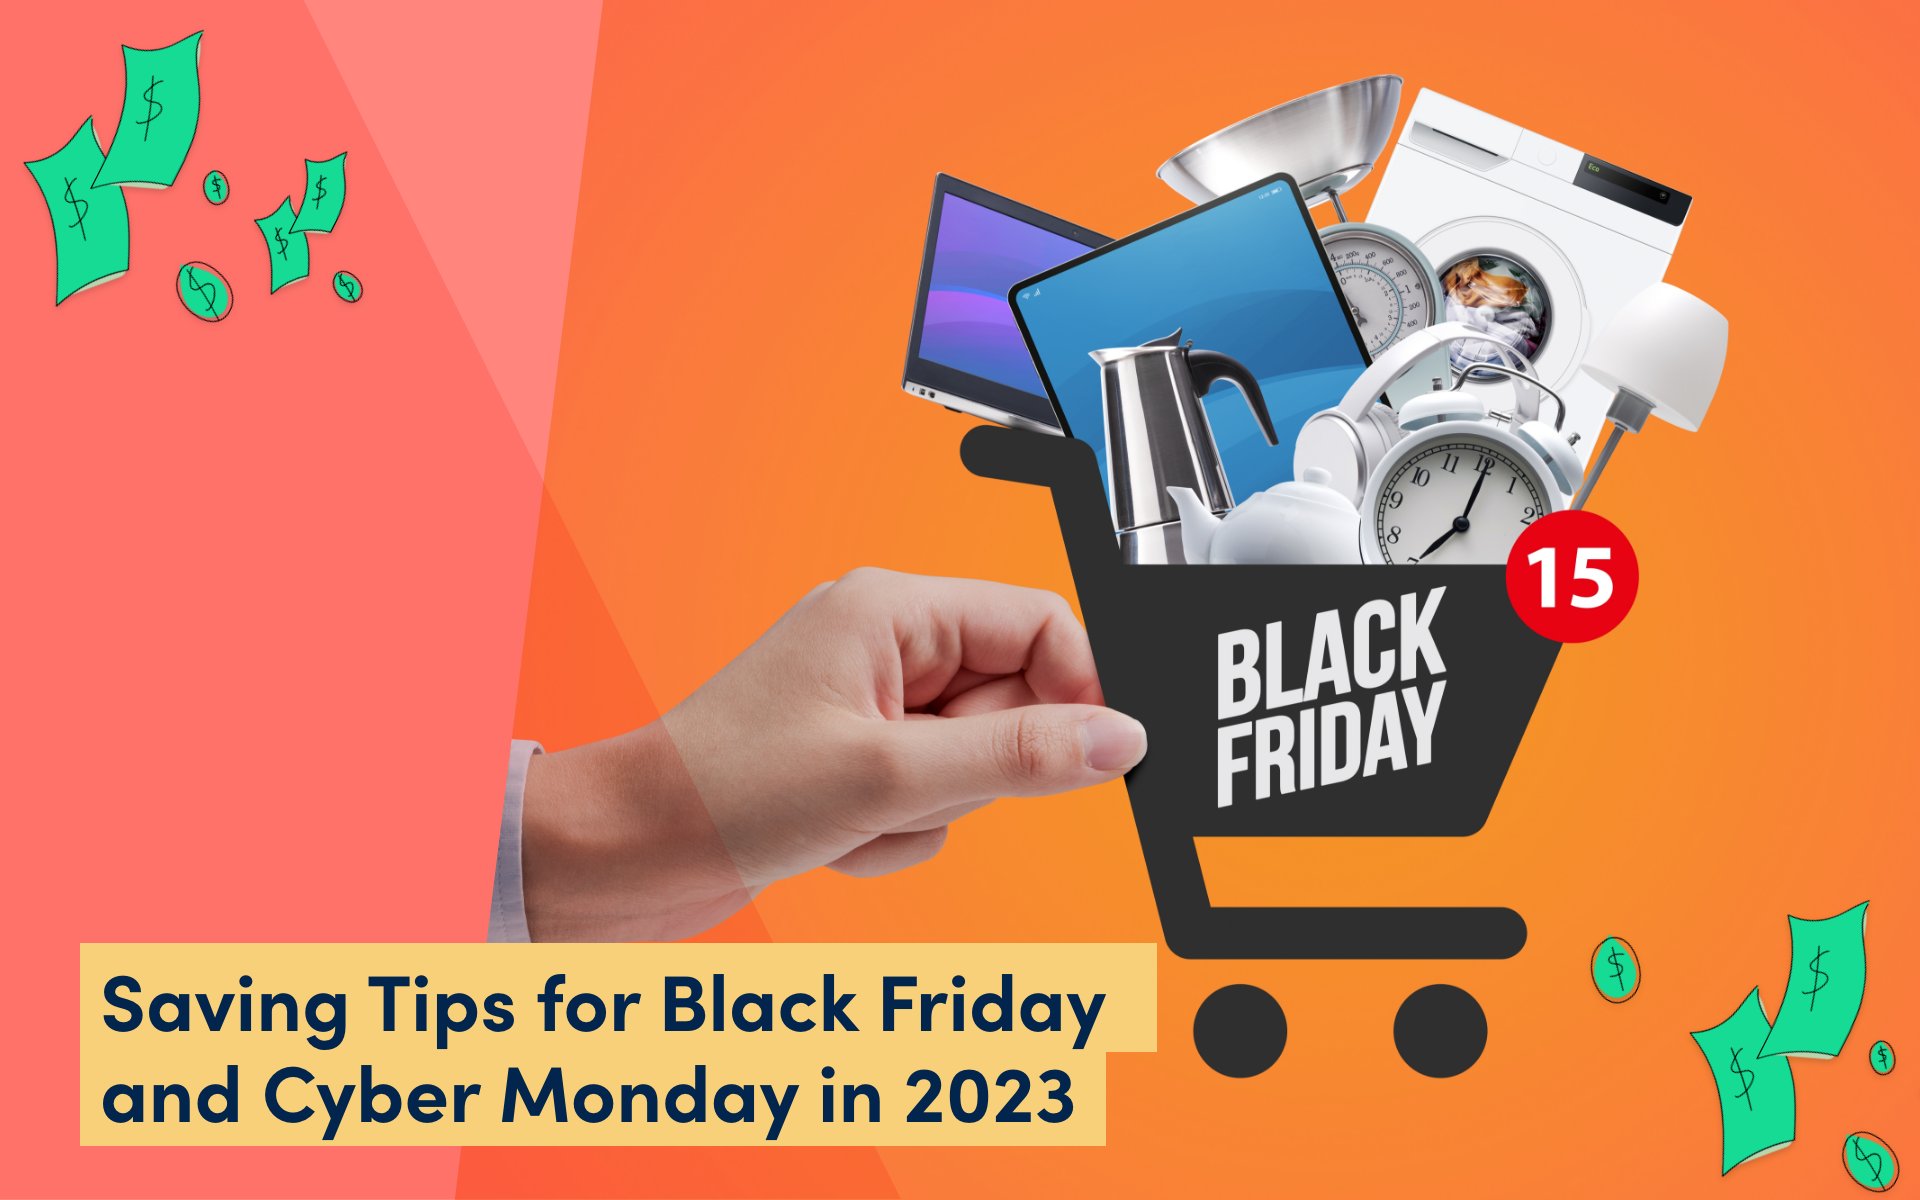 Black Friday vs. Cyber Monday: Which has better deals in 2023